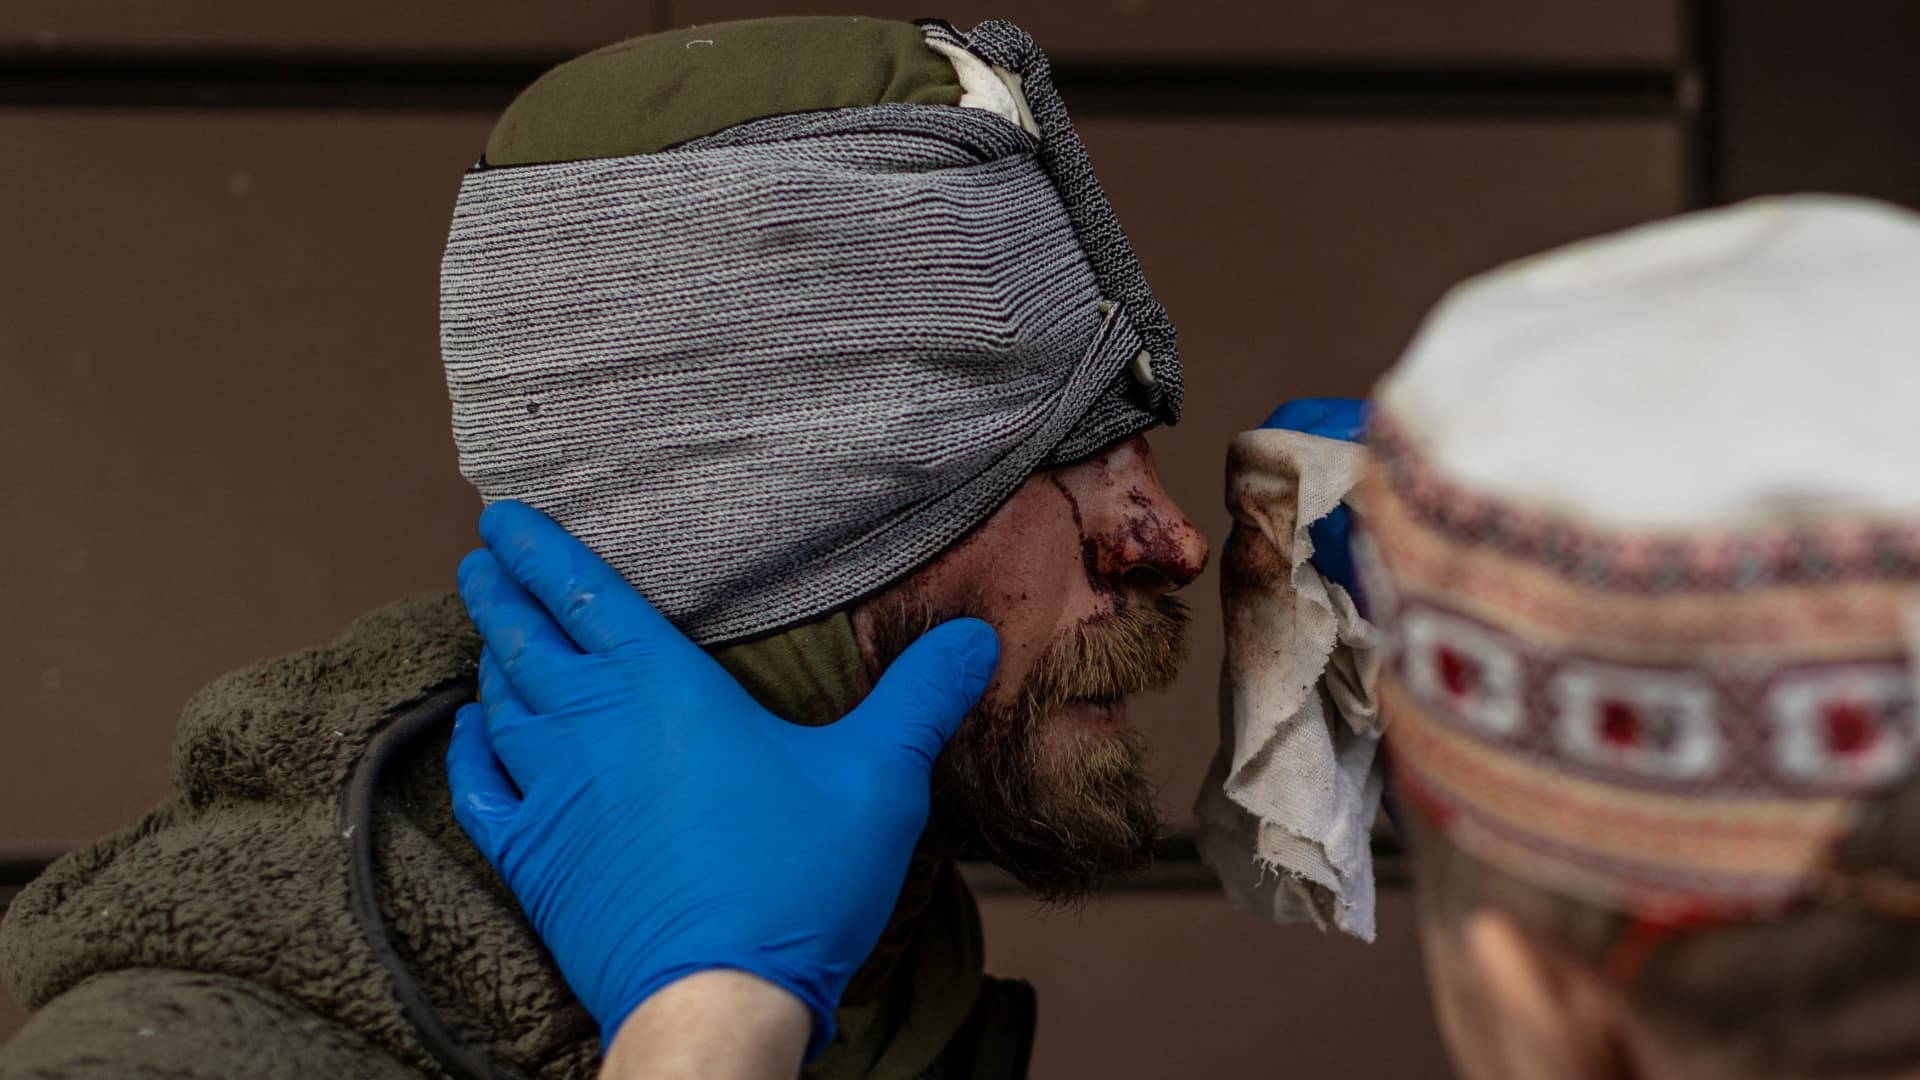 A nurse cleans blood from volunteer soldier Maksim, who was injured by shrapnel during combat in Popasna, amid Russia's invasion in Ukraine, outside the emergency room at a hospital in Bakhmut, Donetsk region, Ukraine, May 5, 2022. Maksim signed up to fight a week after the invasion started. 